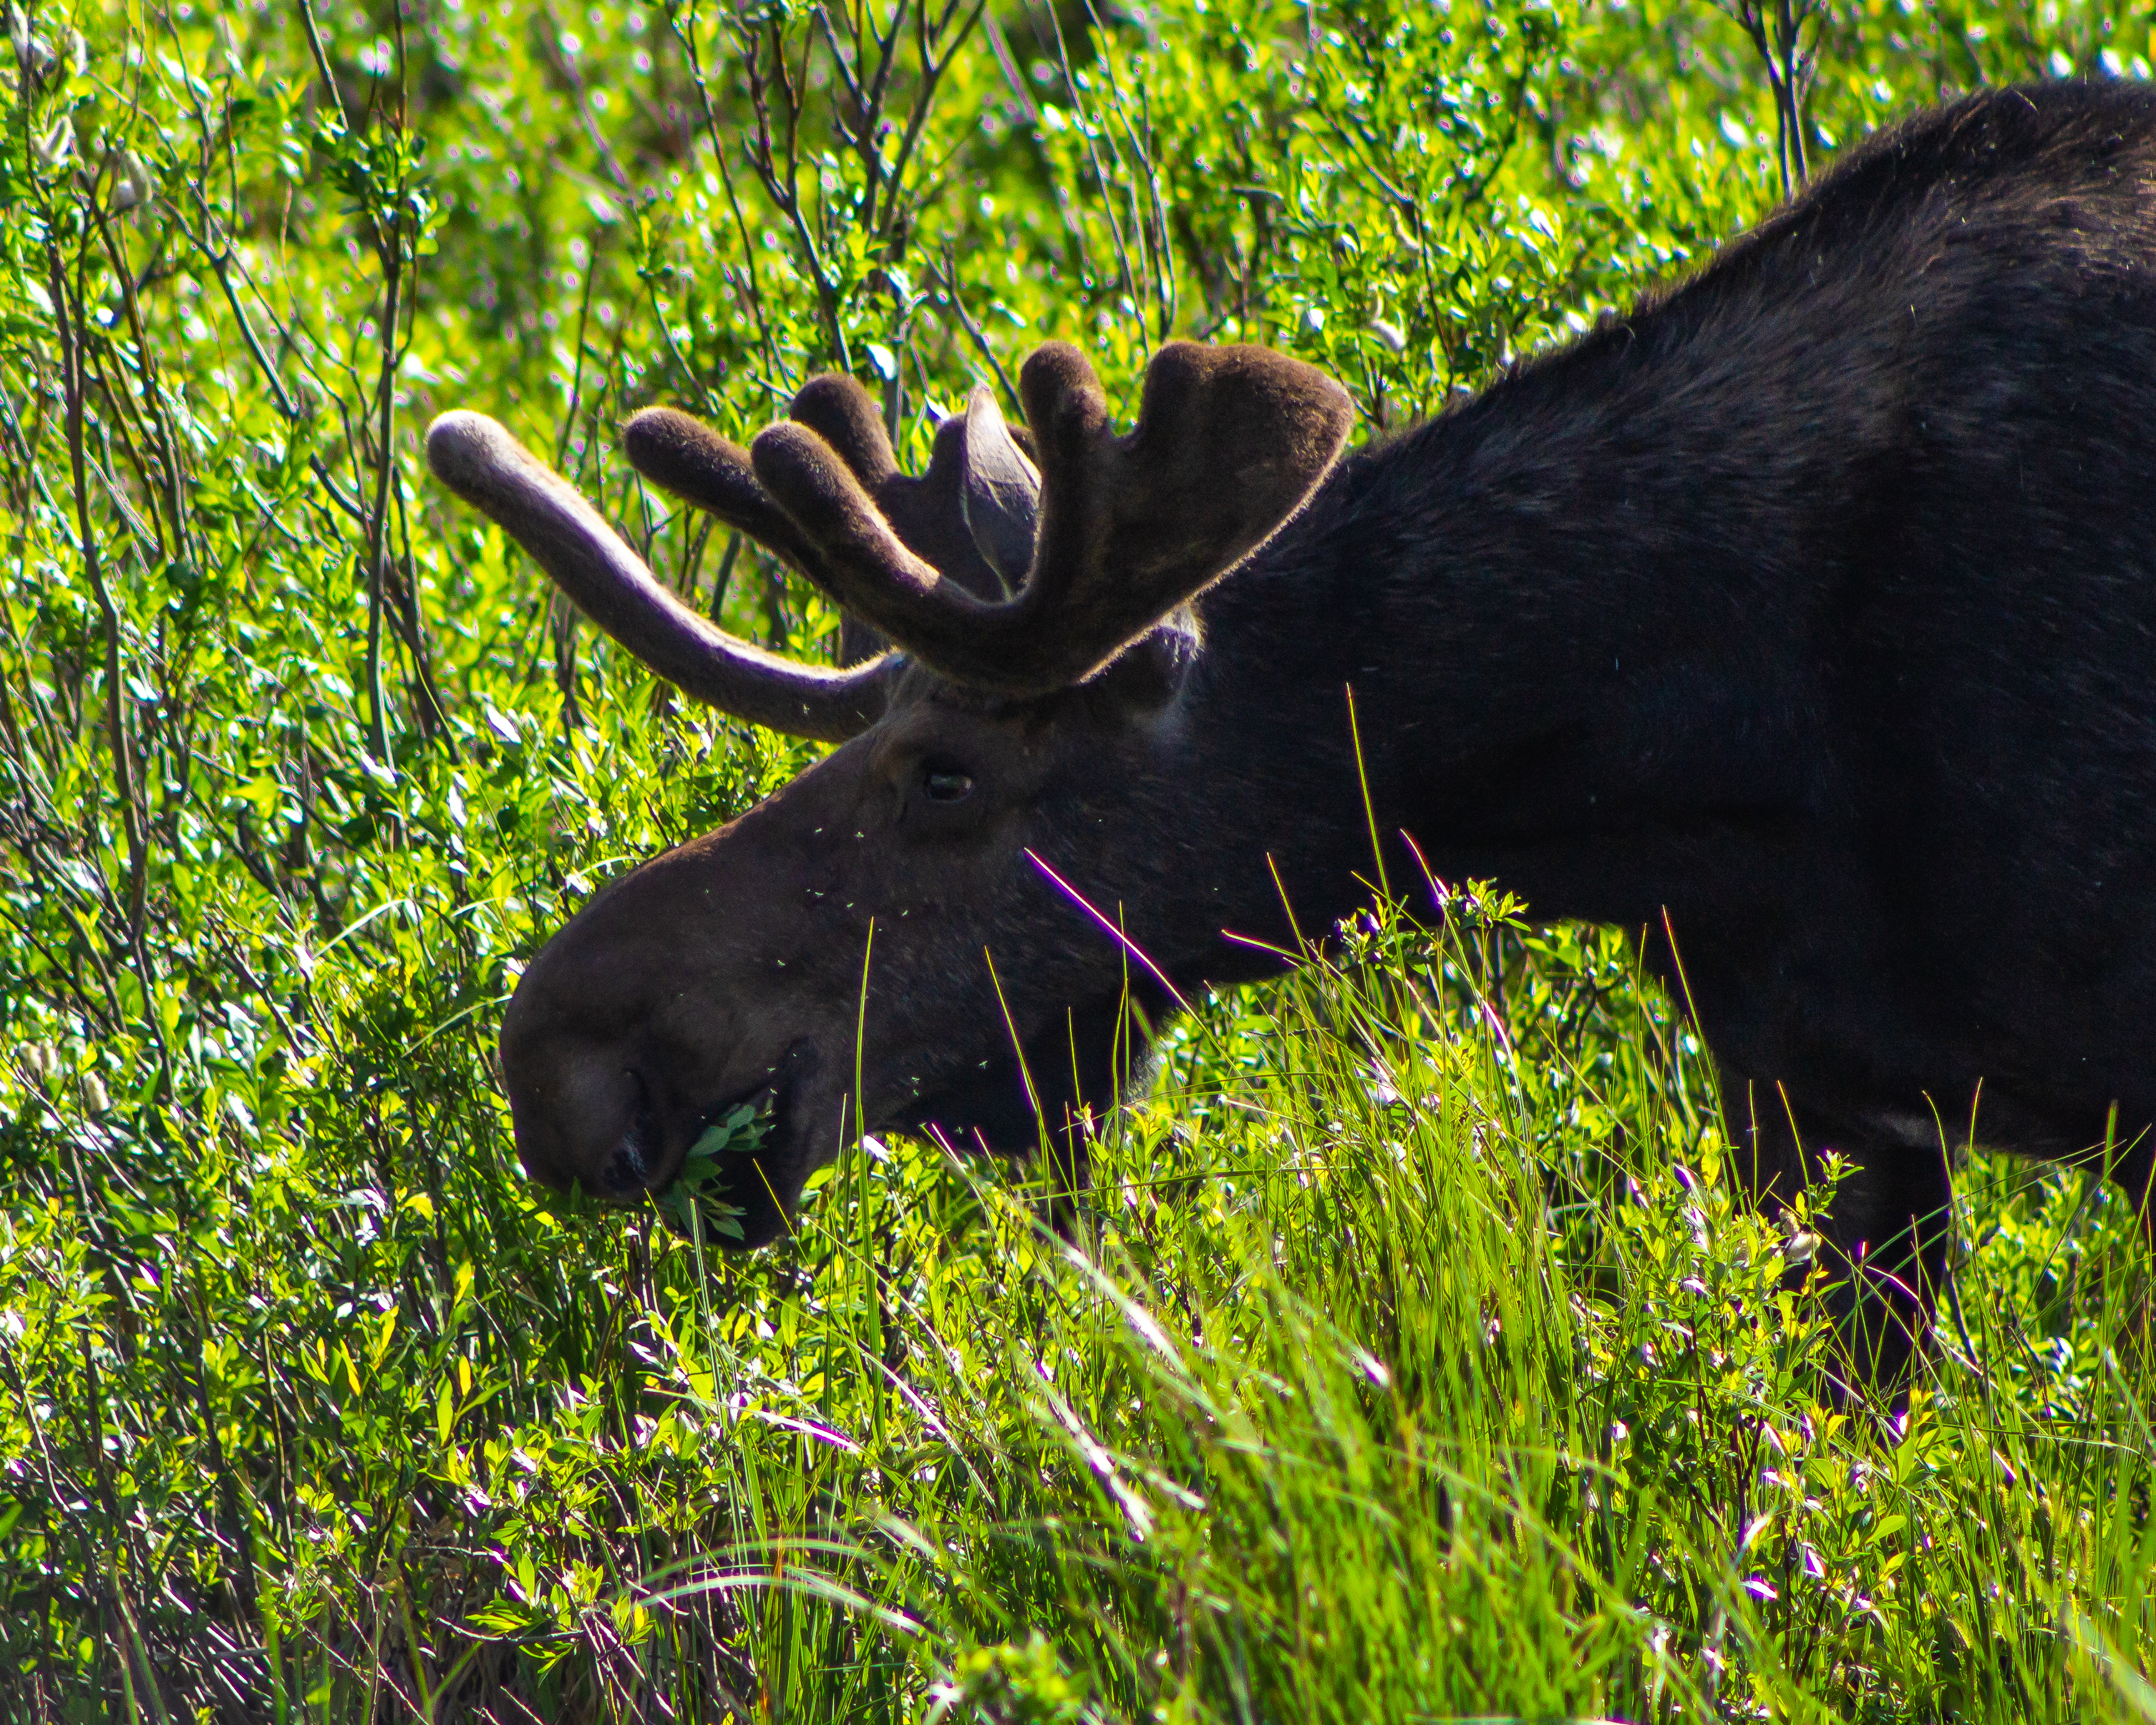 A picture of a moose eating grass.